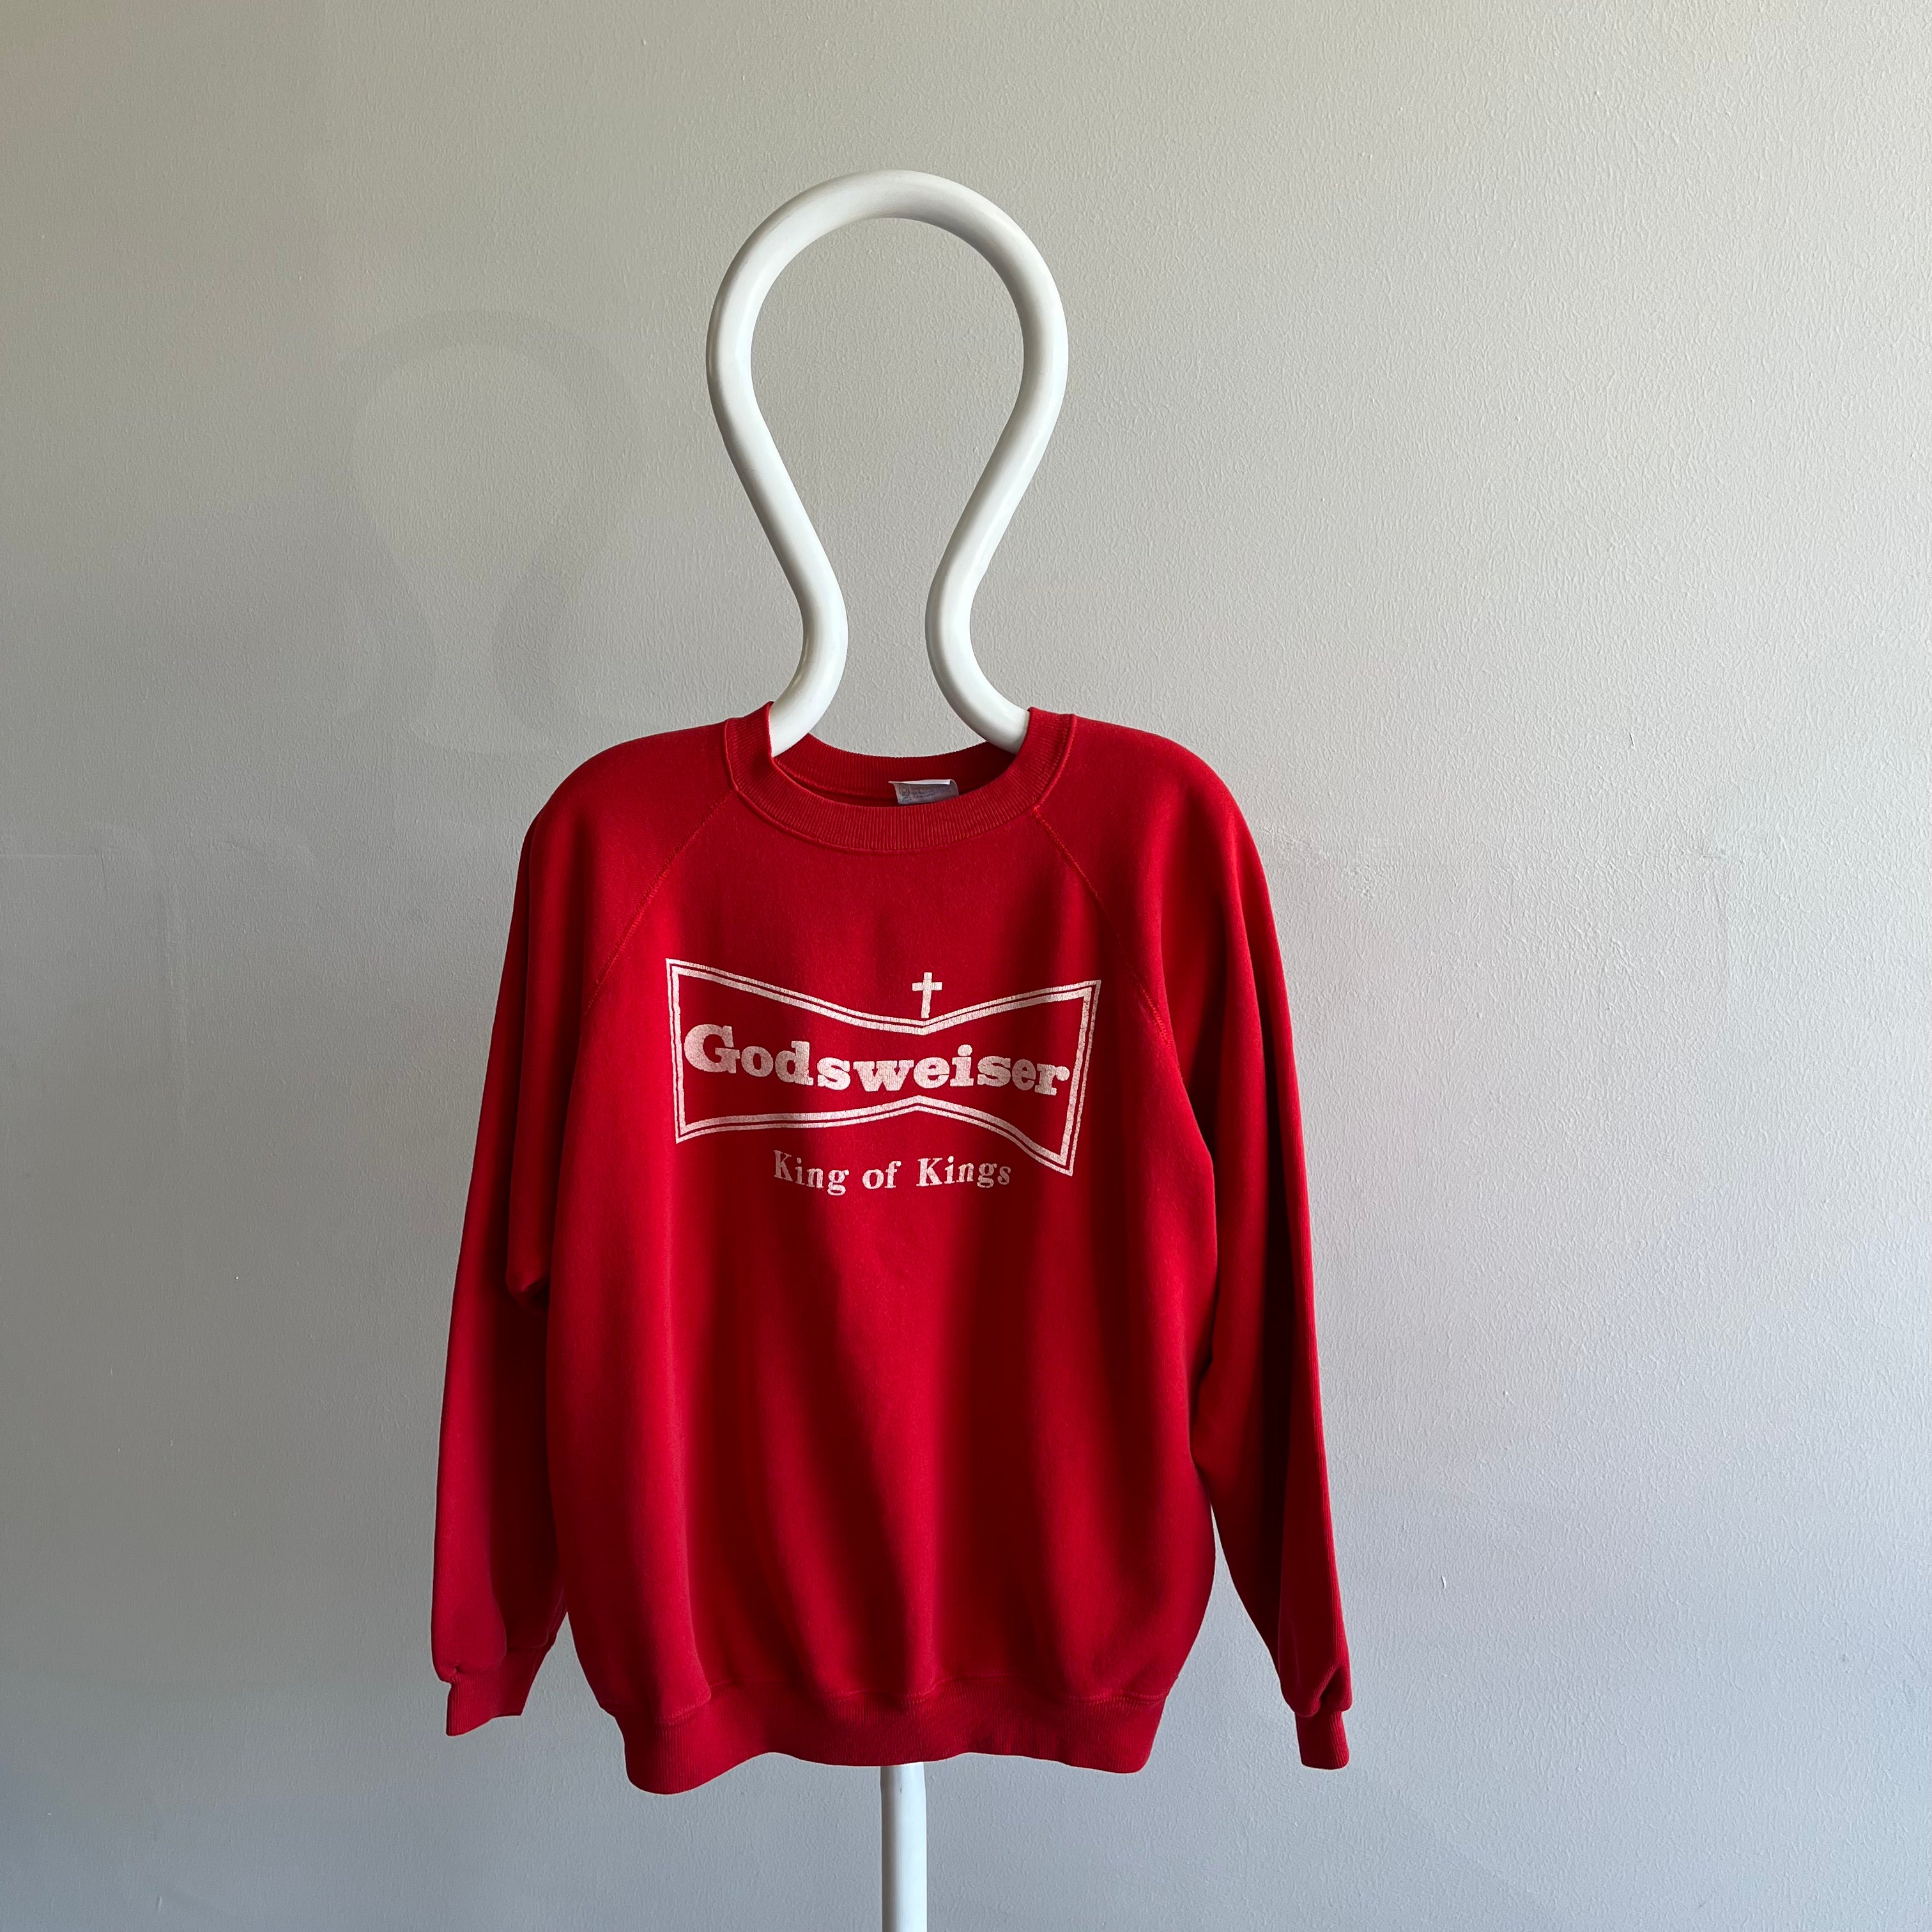 1980s Godweiser - This Blood's For You - Sweatshirt